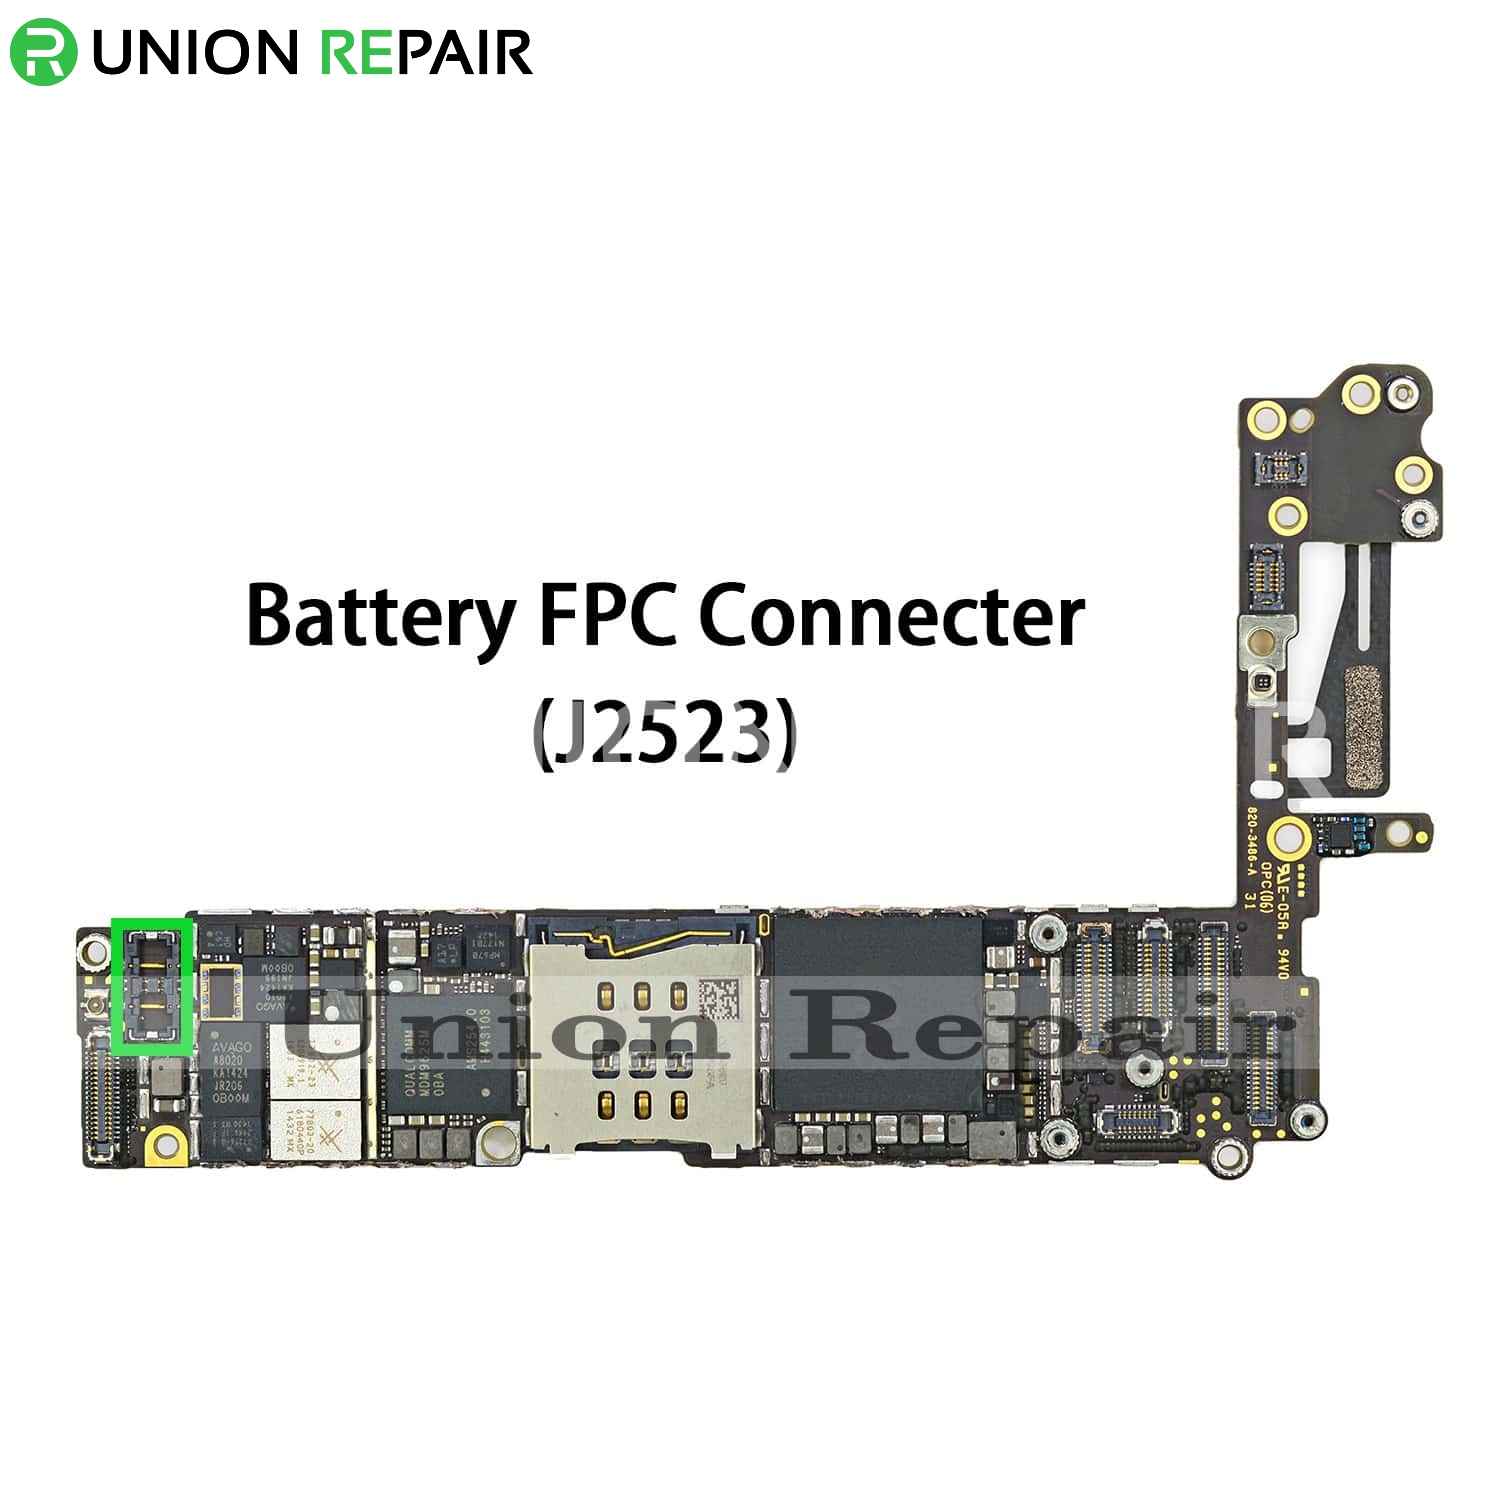 Replacement for iPhone 6 Battery Connector Port Onboard